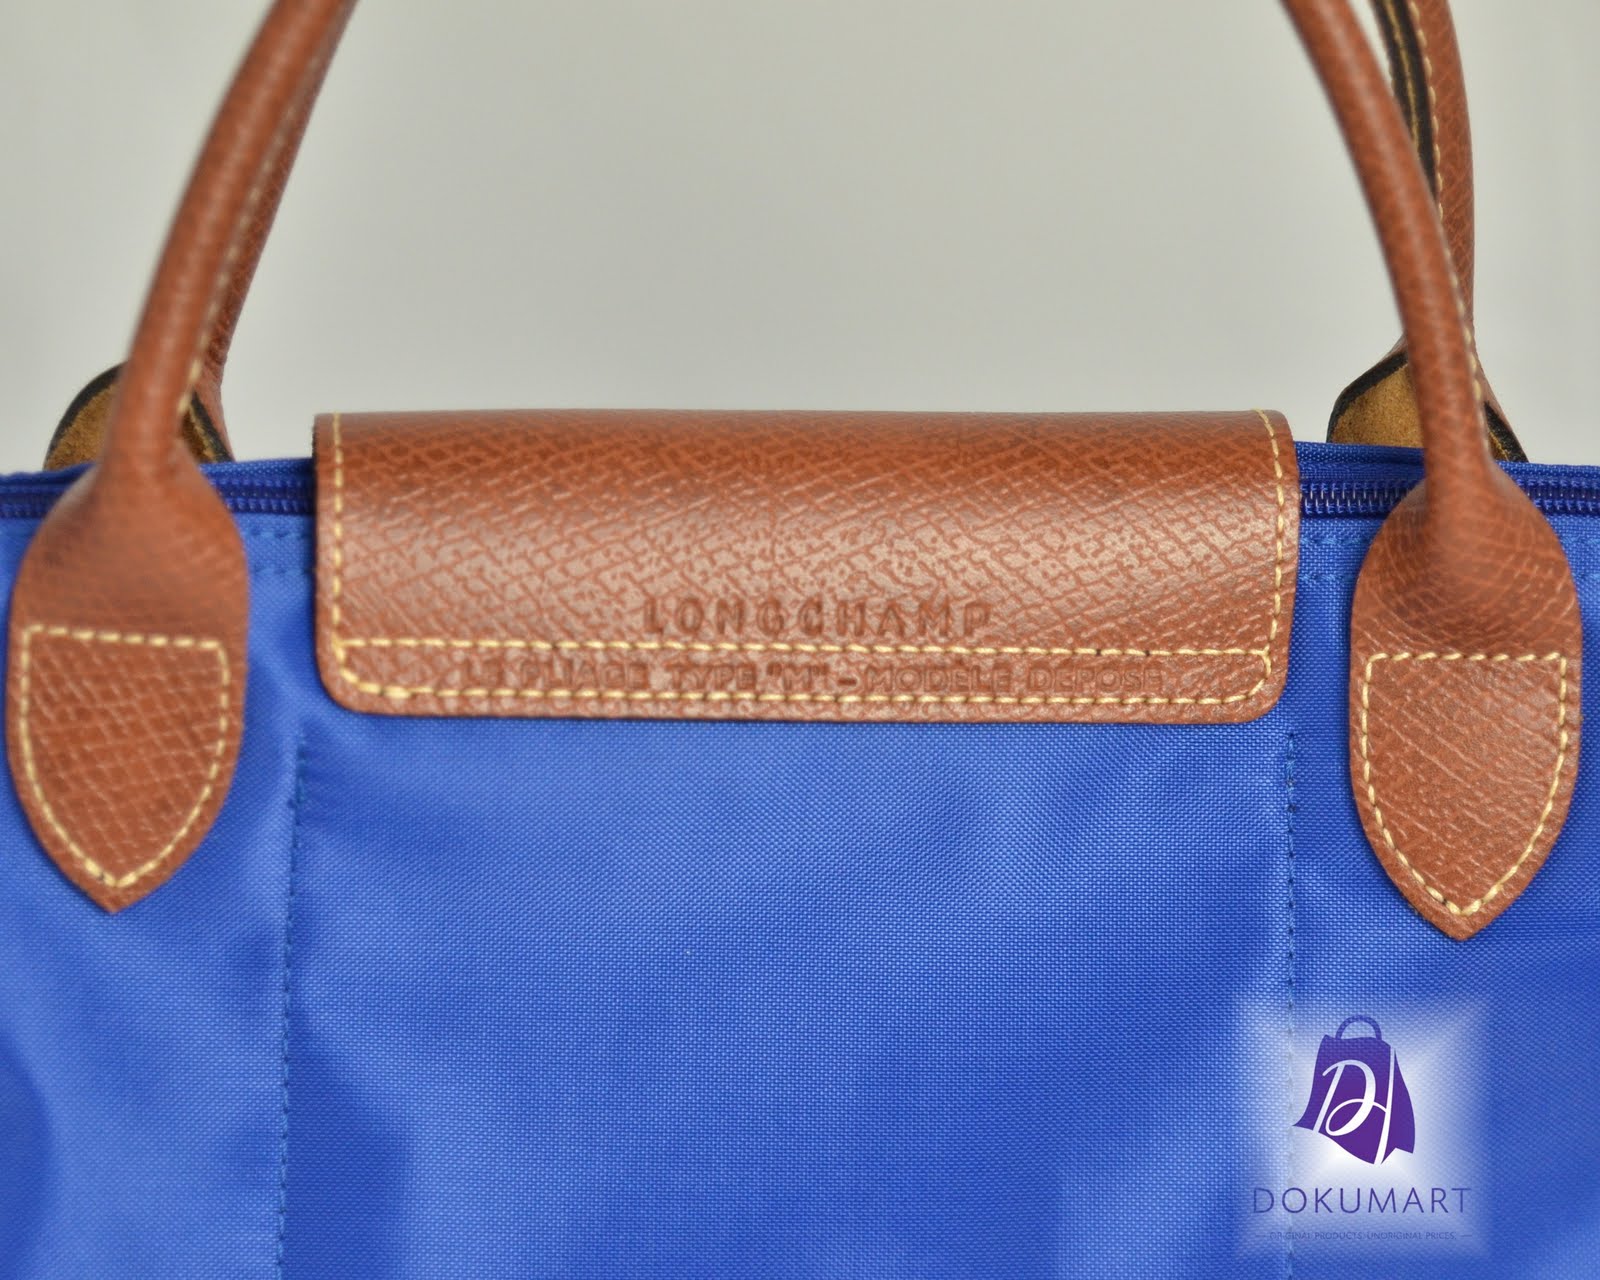 longchamps products